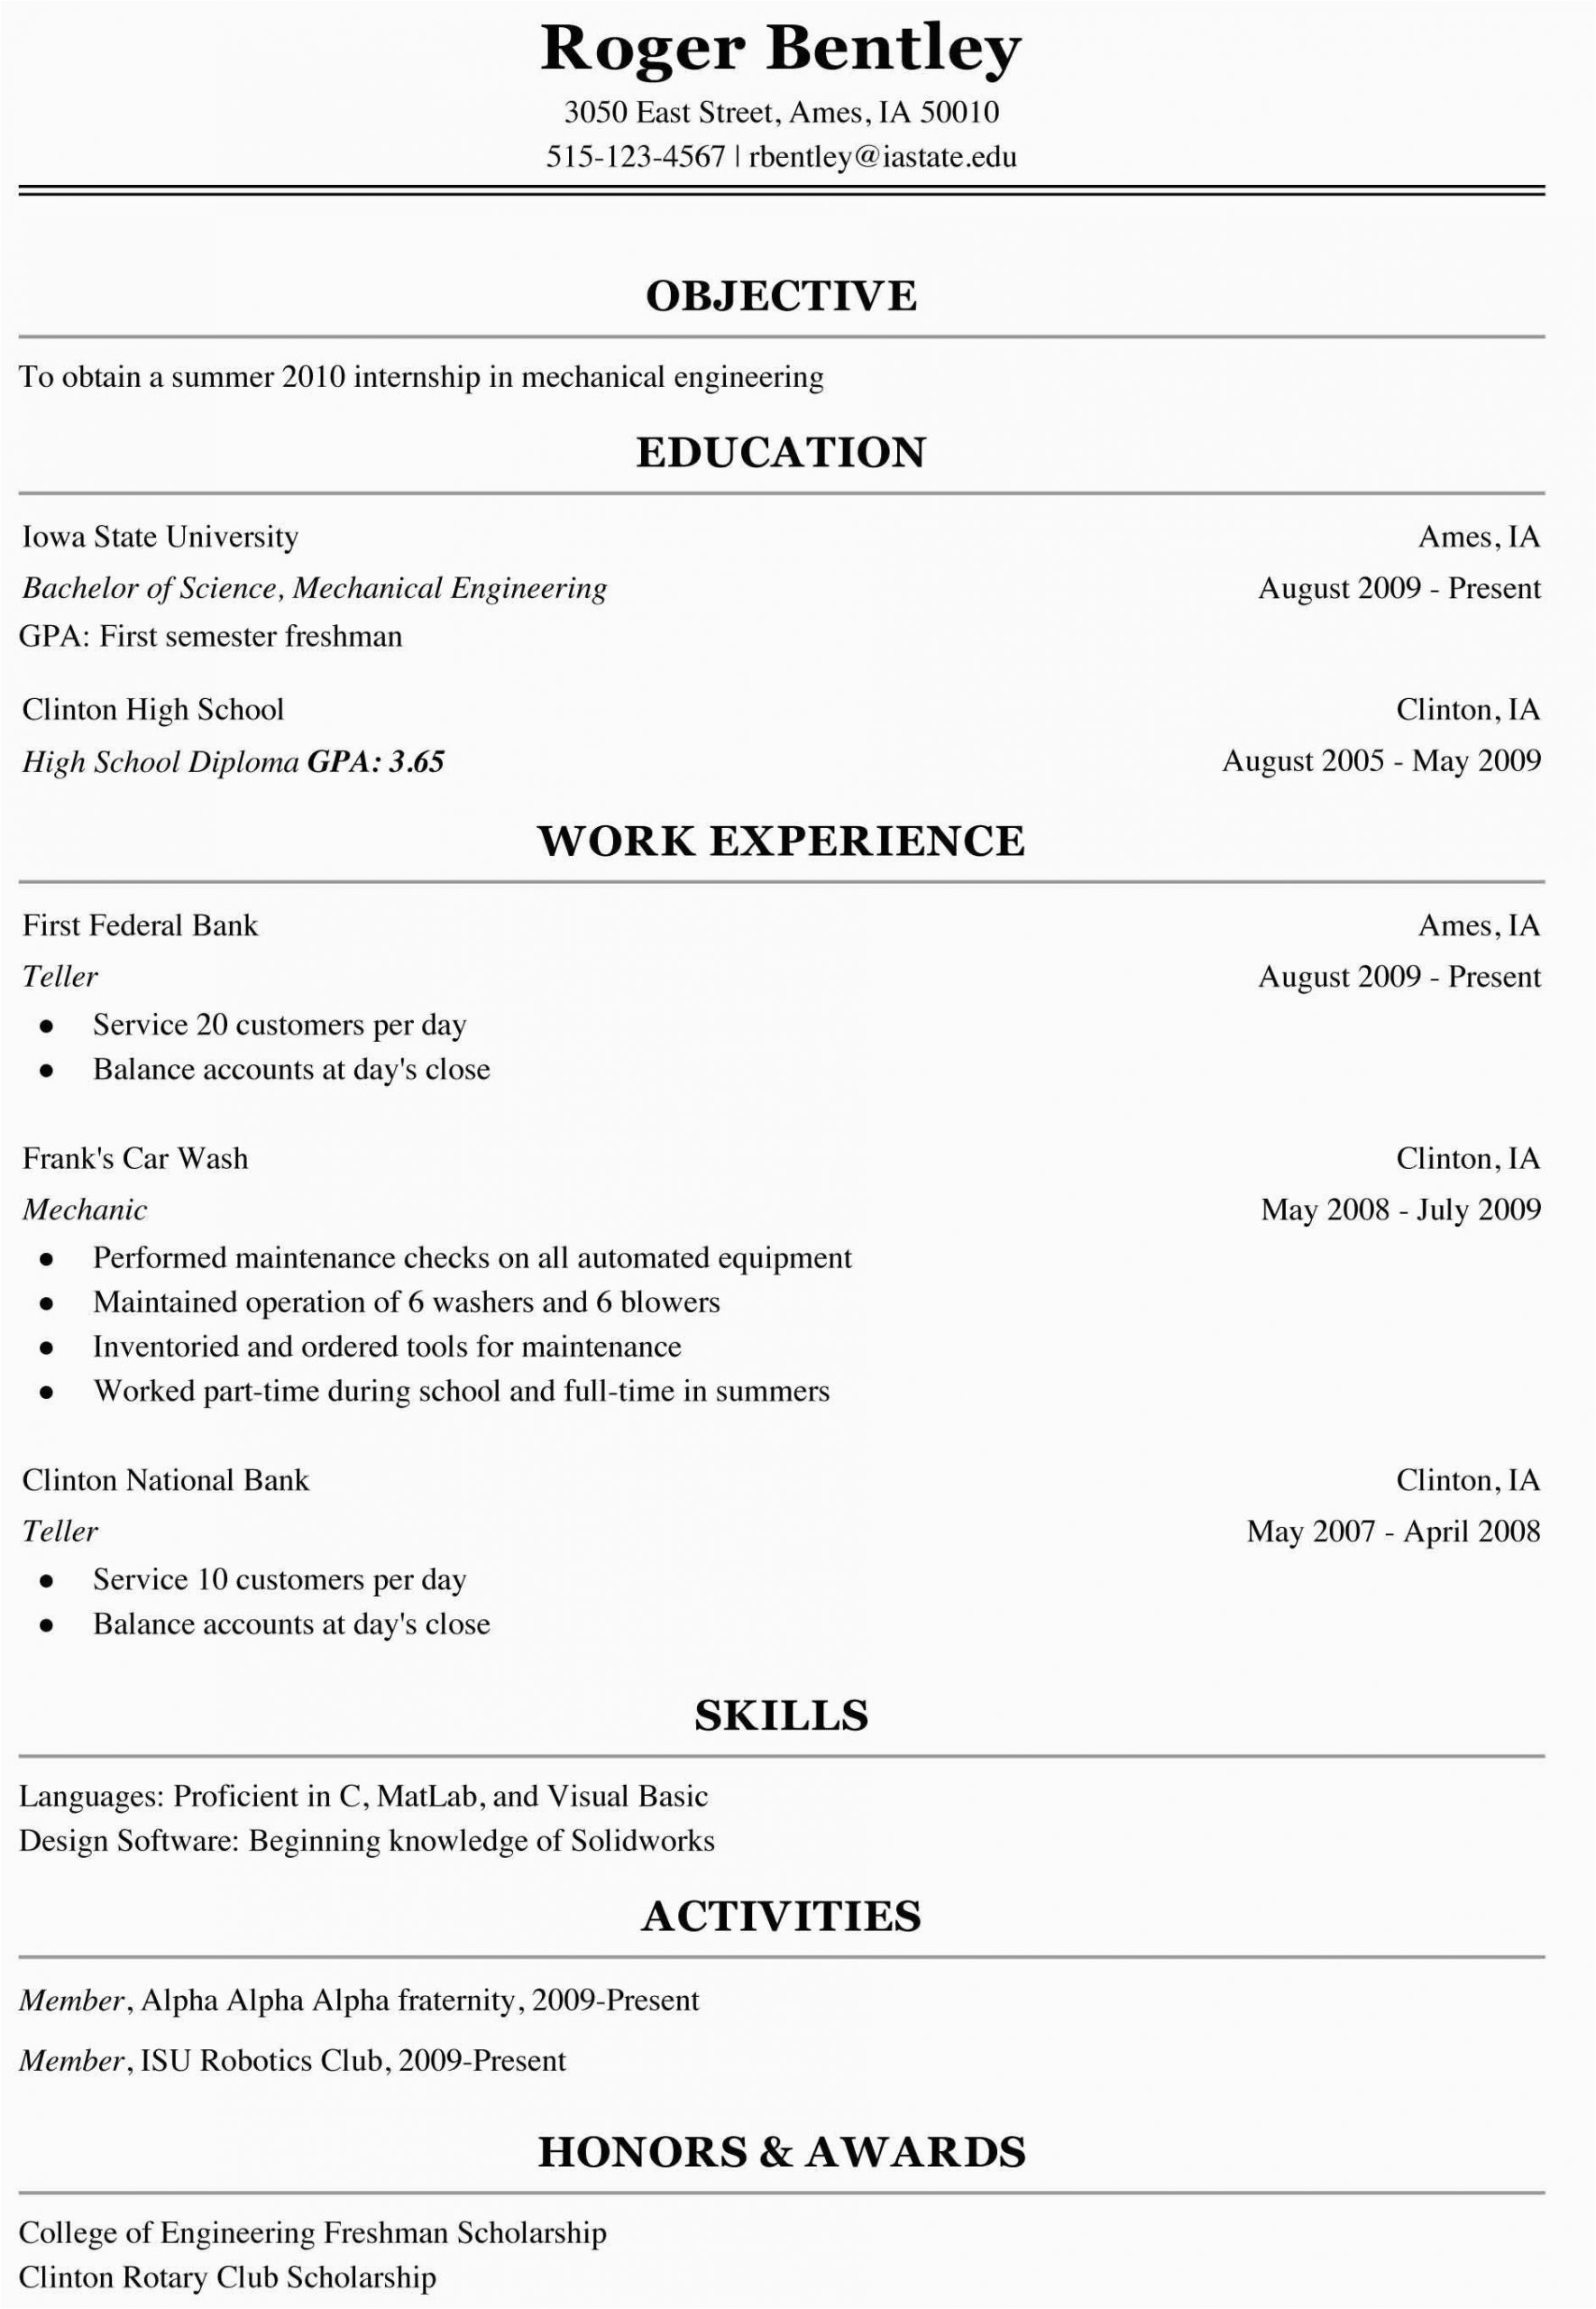 Resume Template No Work Experience College Resume with No Work Experience College Student Pdf